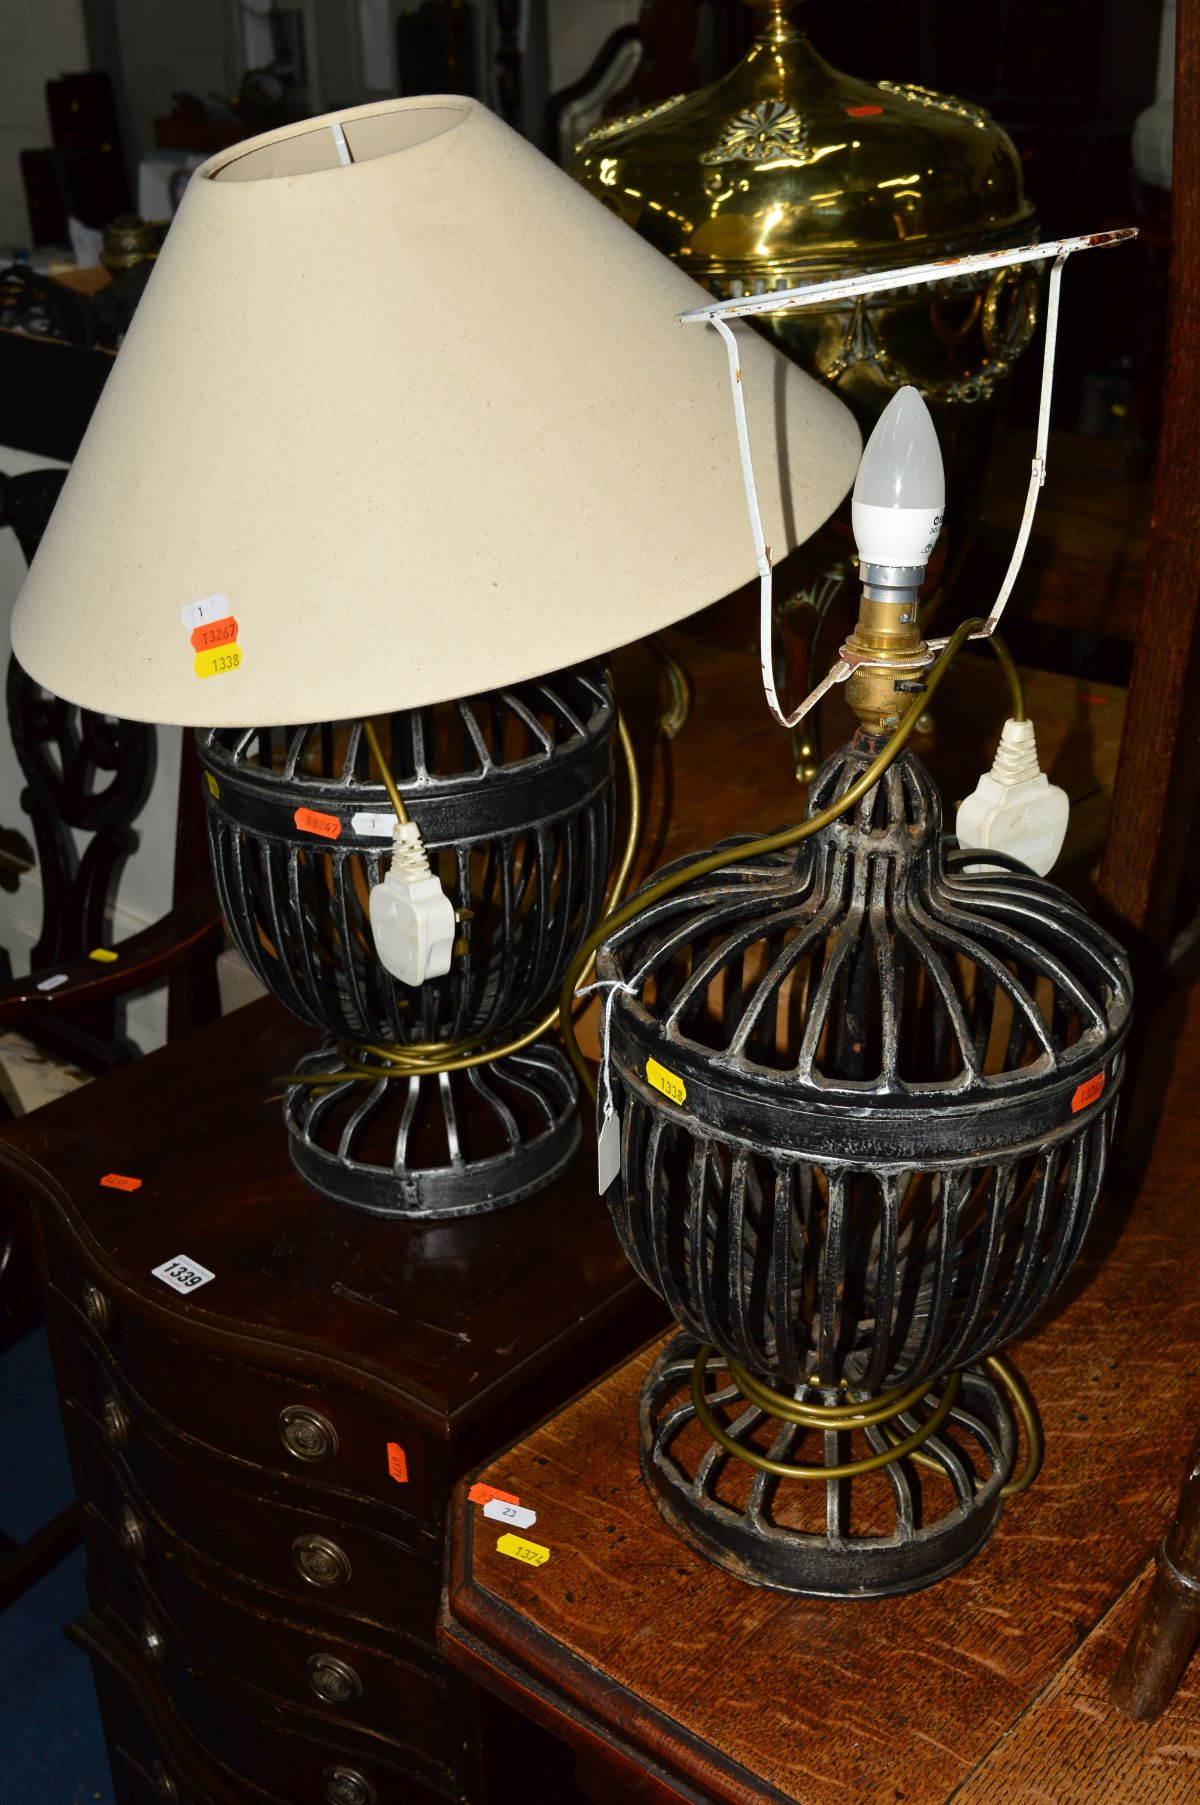 A PAIR OF WROUGHT IRON TABLE LAMPS (one with a shade)